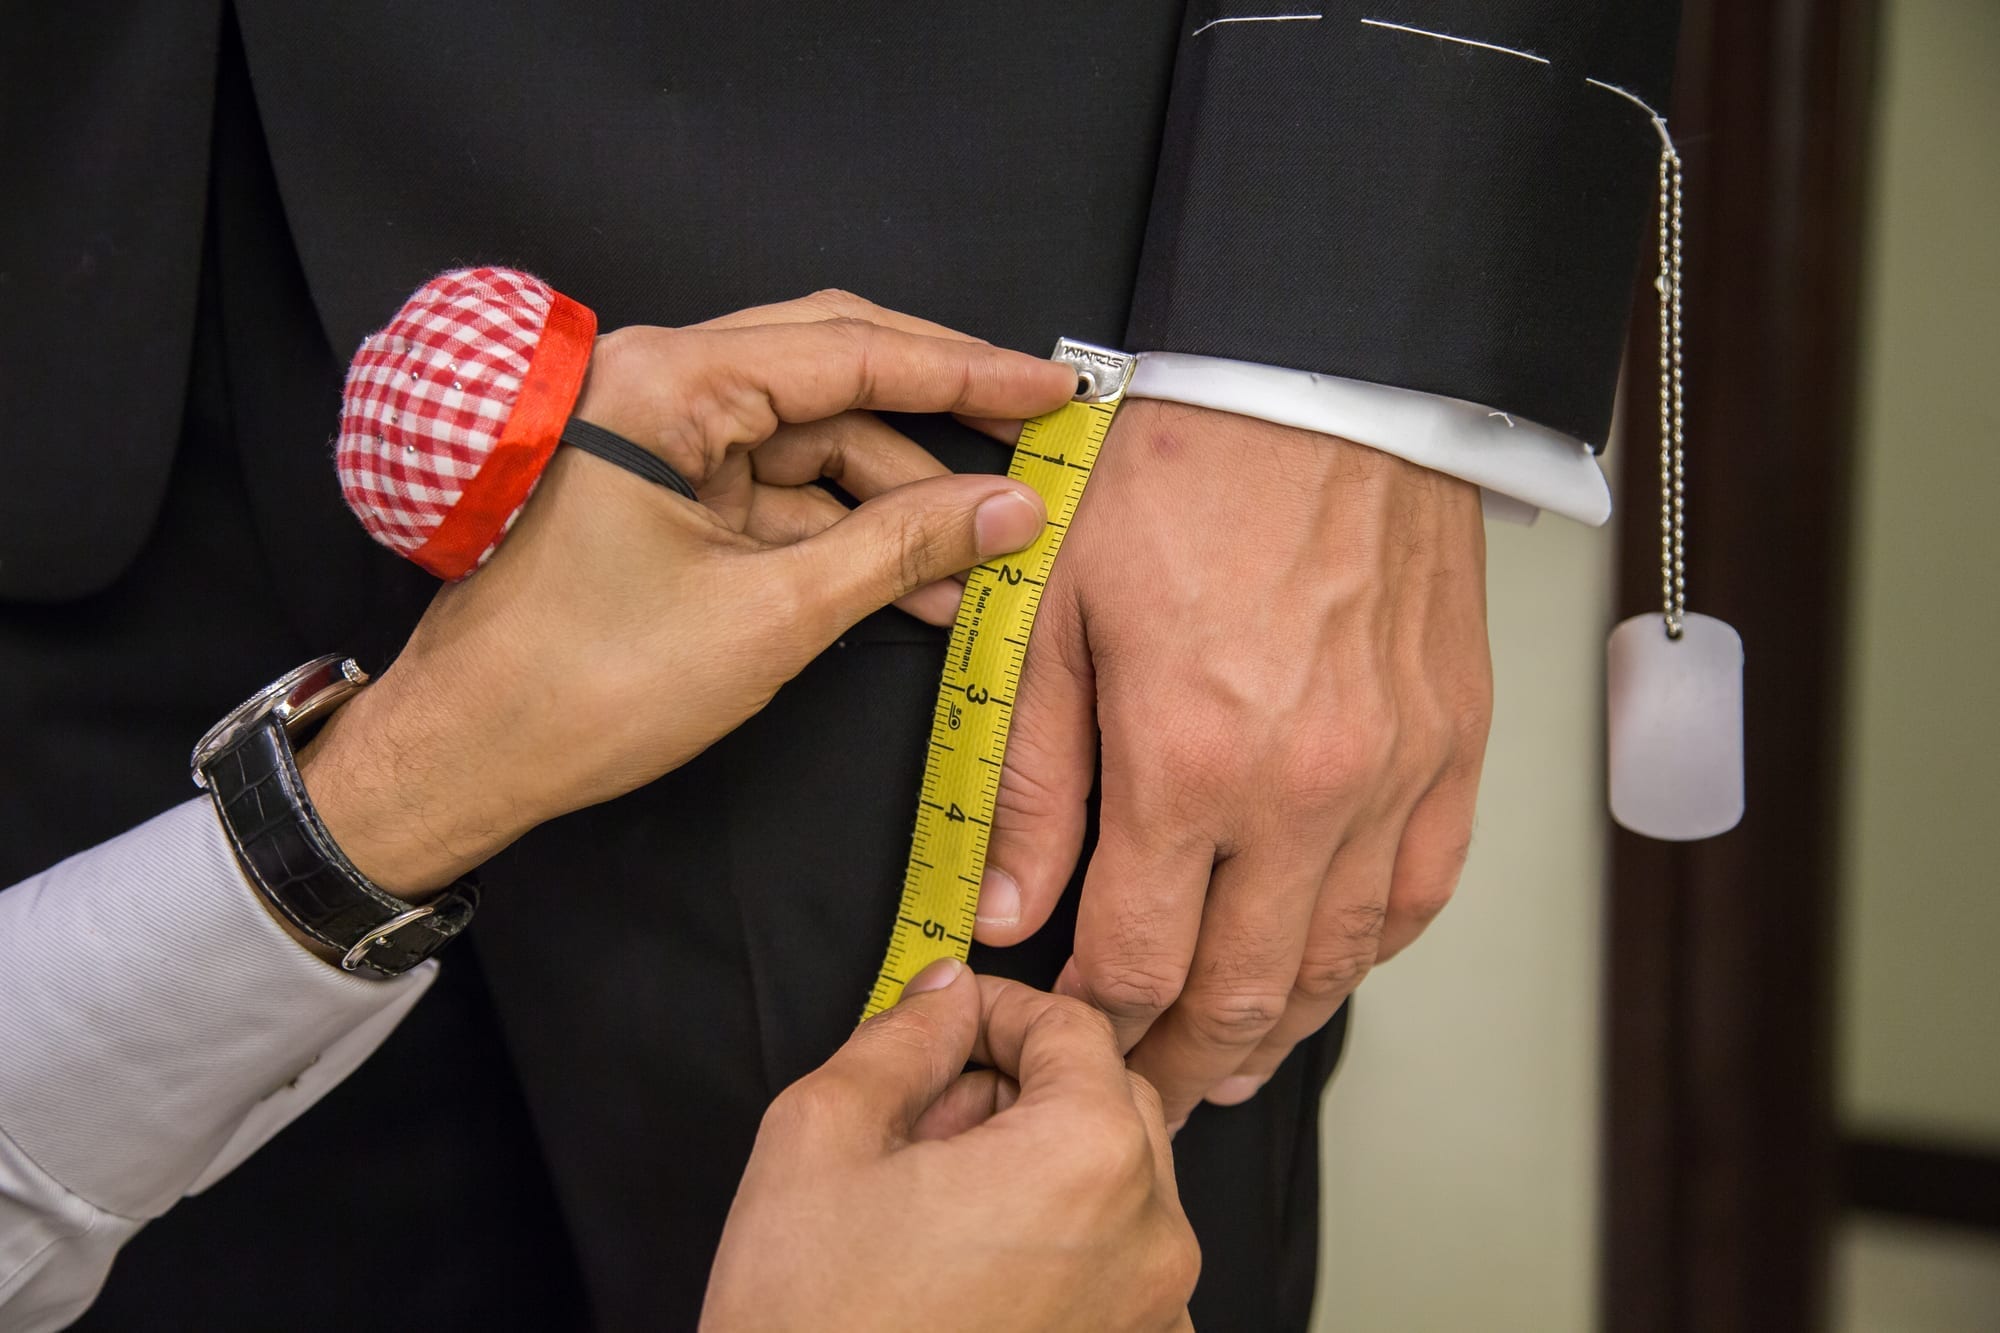 Want clothes that fit? Buy a tailor's tape right now